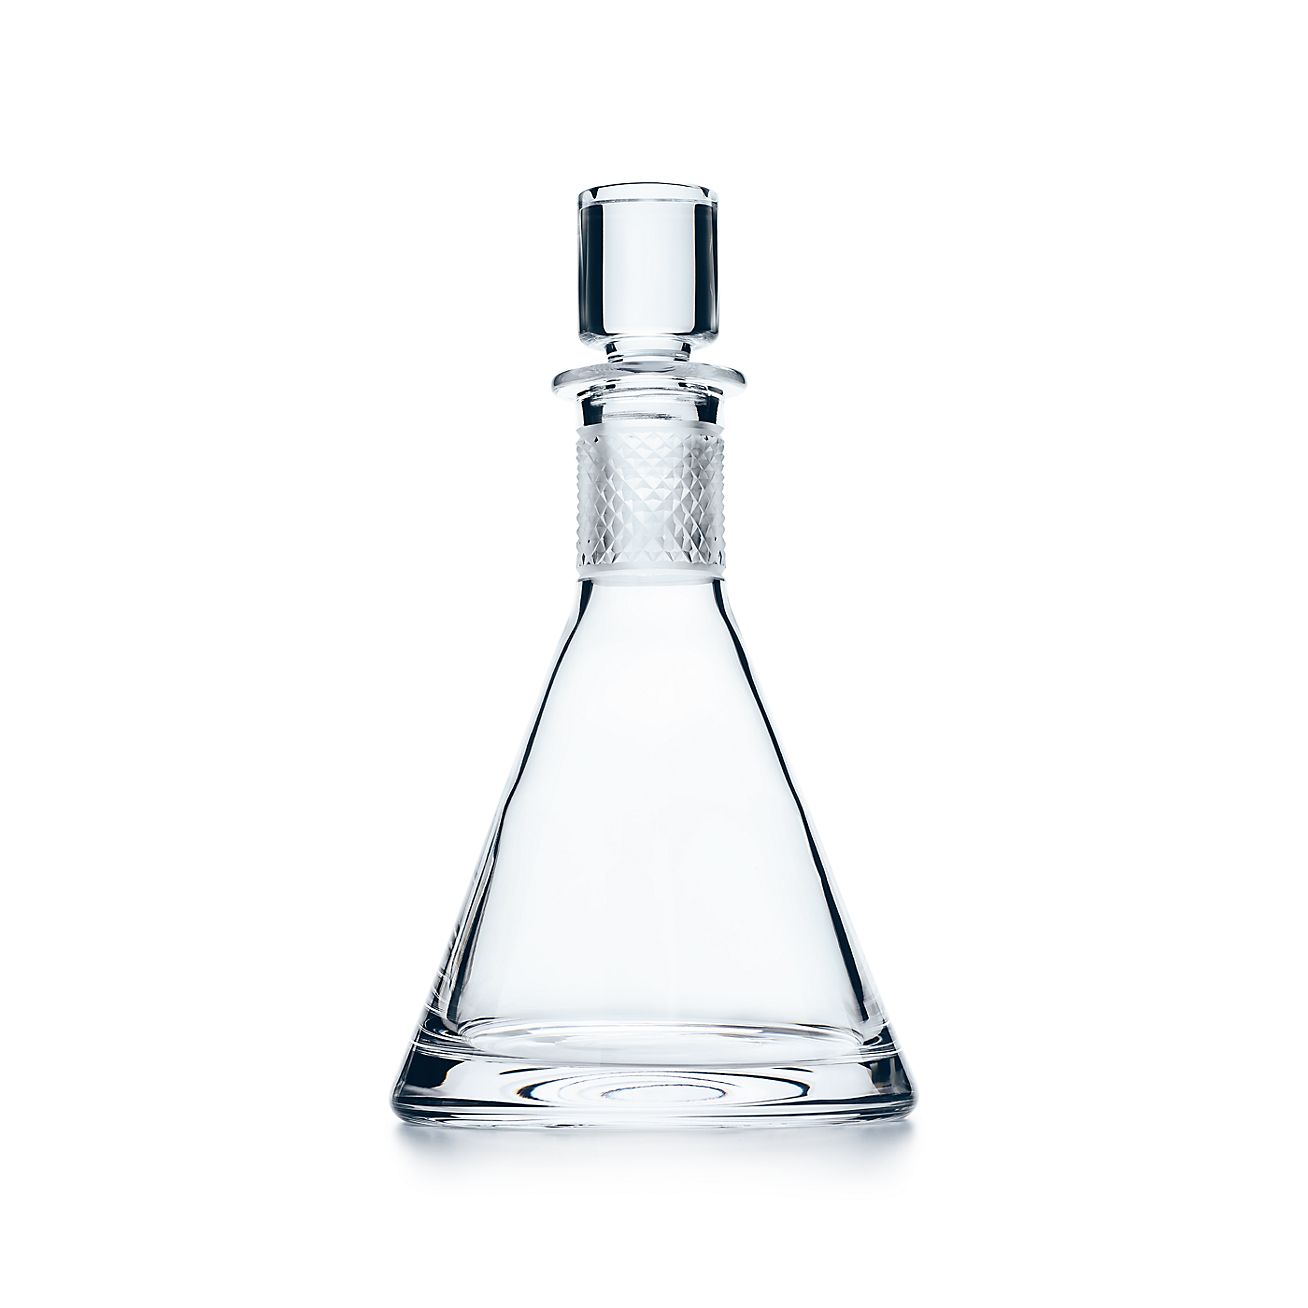 tiffany and co wine decanter